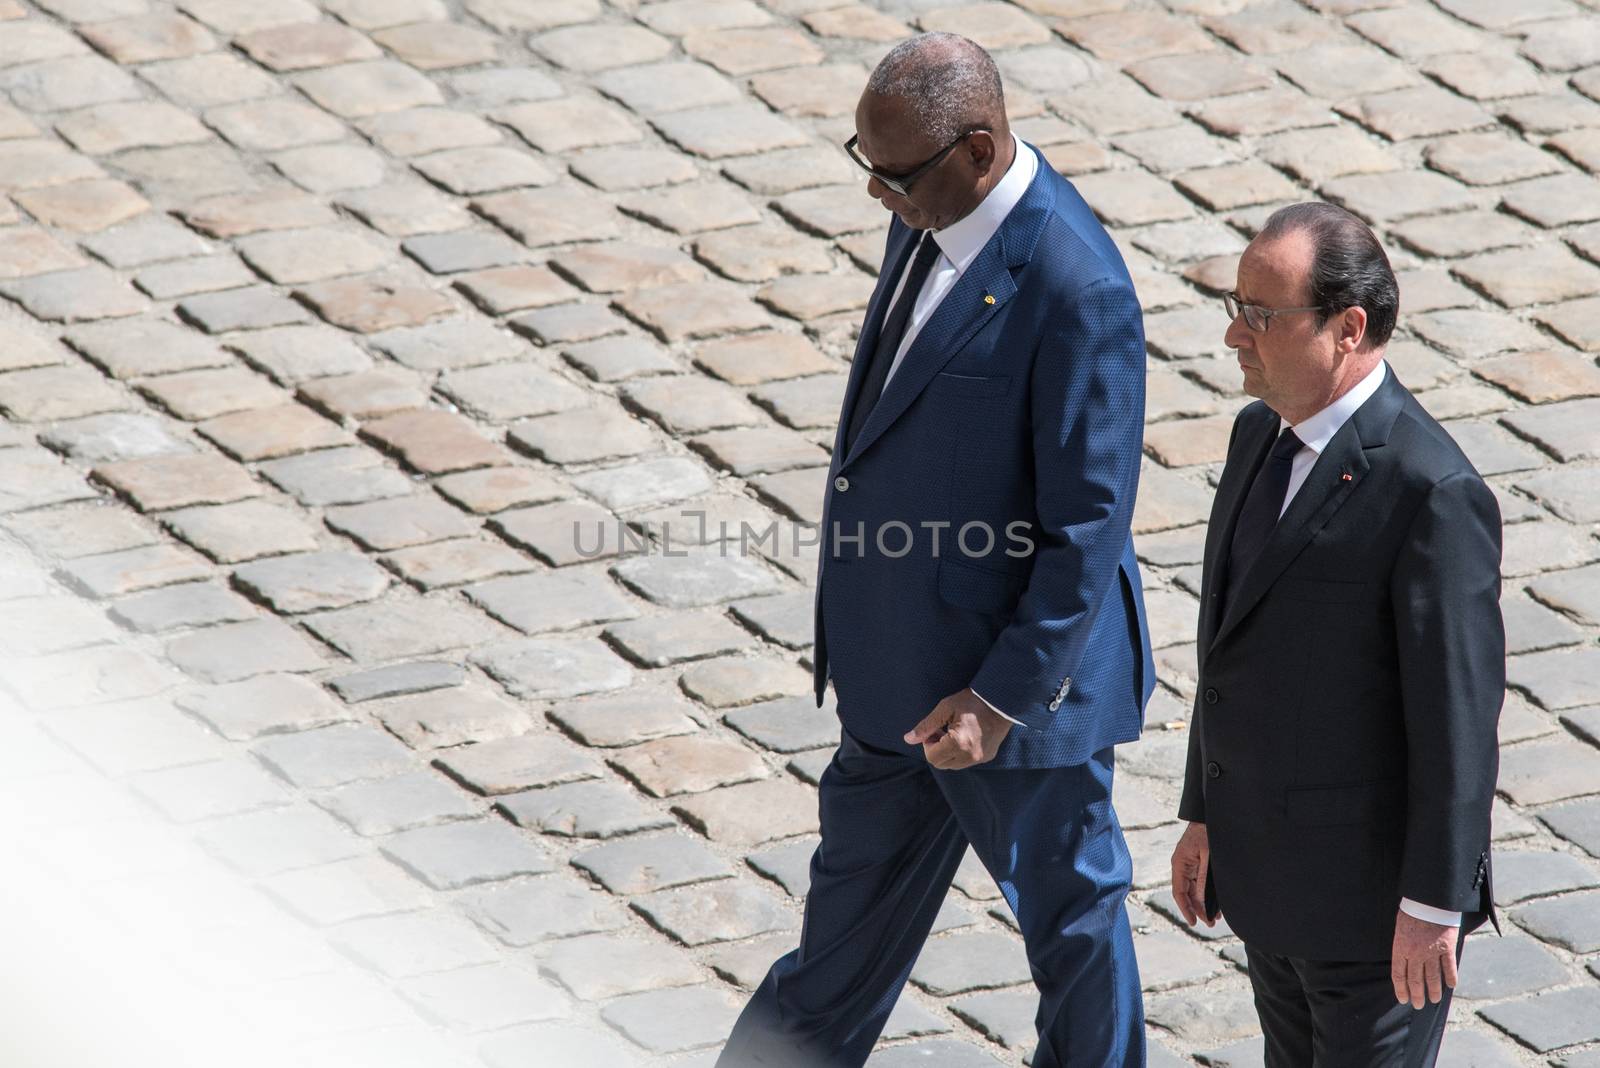 FRANCE, Paris : Malian President Ibrahim Boubacar Keita (L) holds hands with his French counterpart Francois Hollande as they attend solemn and national tribute ceremony at the Hotel des Invalides in Paris, on April 20, 2016 in honour of the three French soldiers killed in service in Mali last week.Three French peacekeeping soldiers died after their armoured car ran over a landmine in Mali, the French presidency said April 13, 2016. One soldier, Mickael Poo-Sing, was killed immediately in the blast on April 12, 2016 and President Francois Hollande learned with great sadness that two more soldiers had died in the west African country, a statement said. The car was leading a convoy of around 60 vehicles travelling to the northern desert town of Tessalit when it hit the mine, according to the French defence ministry. The troops were part of Operation Barkhane, under which France has some 3,500 soldiers deployed across five countries in the Sahel region, south of the Sahara desert, to combat the jihadist insurgency raging there.